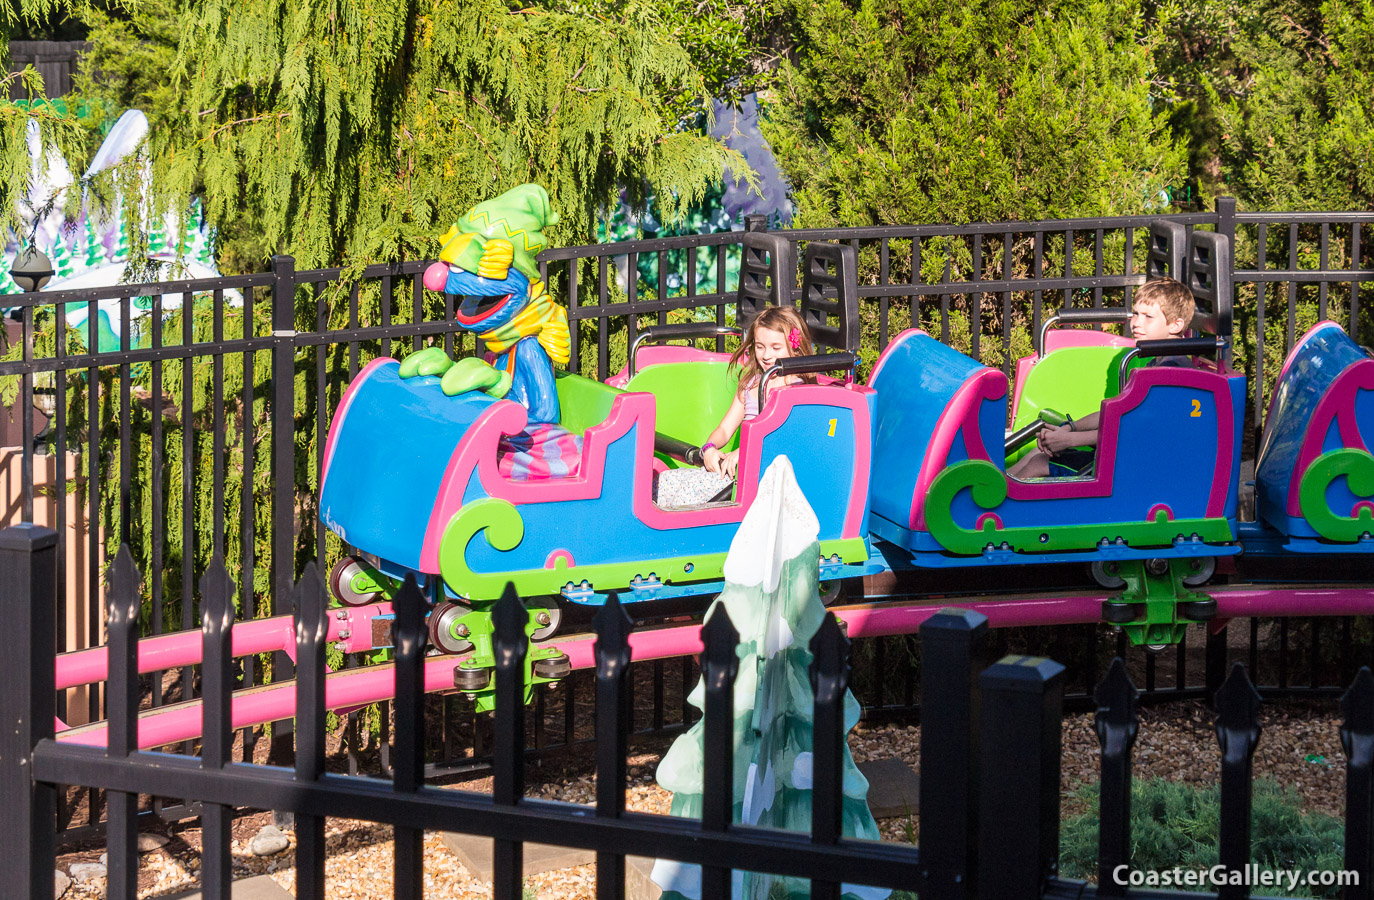 Pictures of Sesame Street's Grover riding the Grover's Alpine Express roller coaster at Busch Gardens Williamsburg